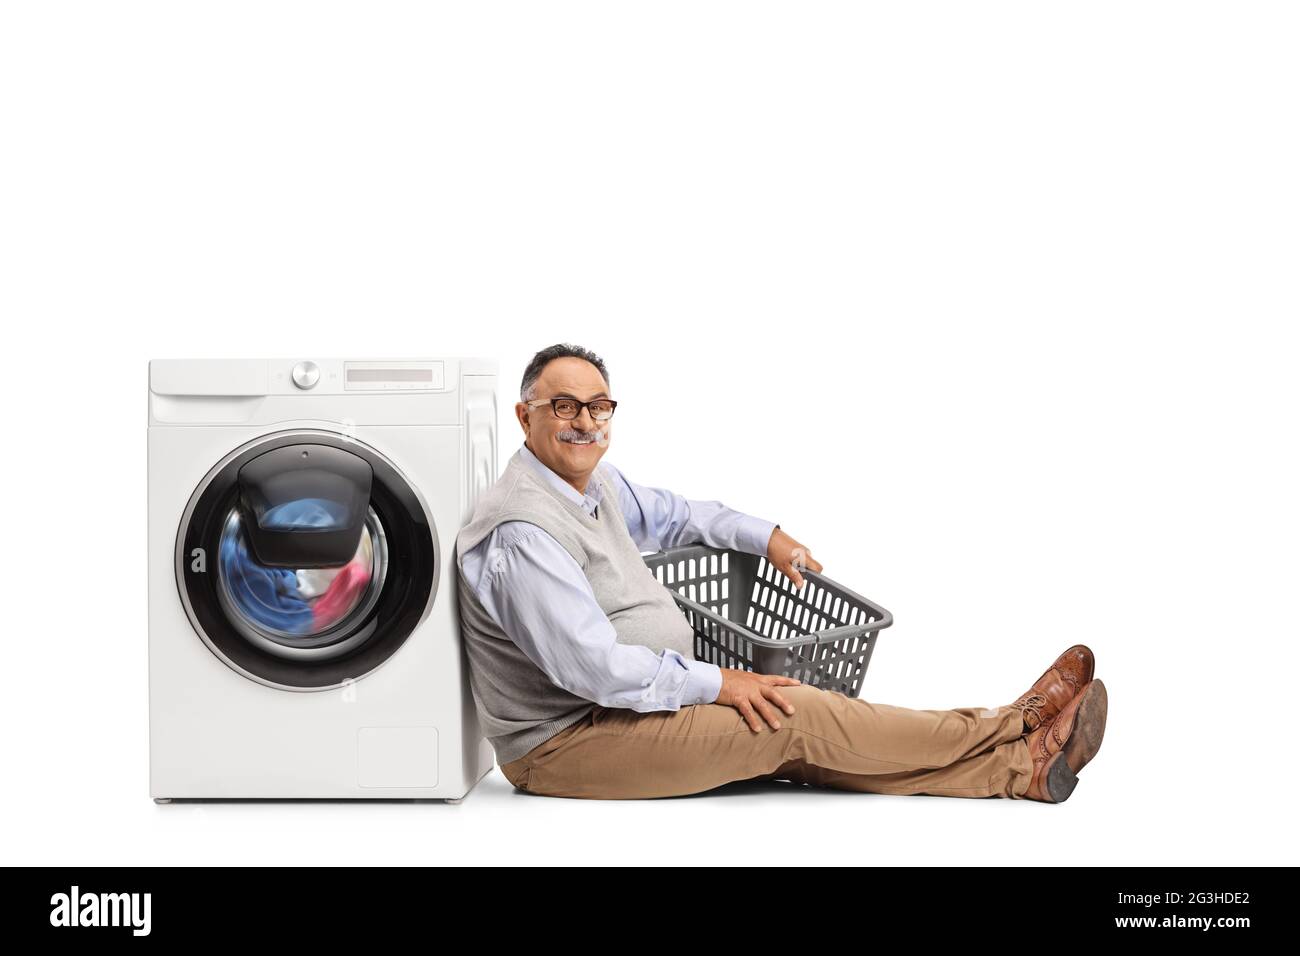 https://c8.alamy.com/comp/2G3HDE2/mature-man-with-an-empty-laundry-basket-sitting-and-leaning-on-a-washing-machine-isolated-on-white-background-2G3HDE2.jpg